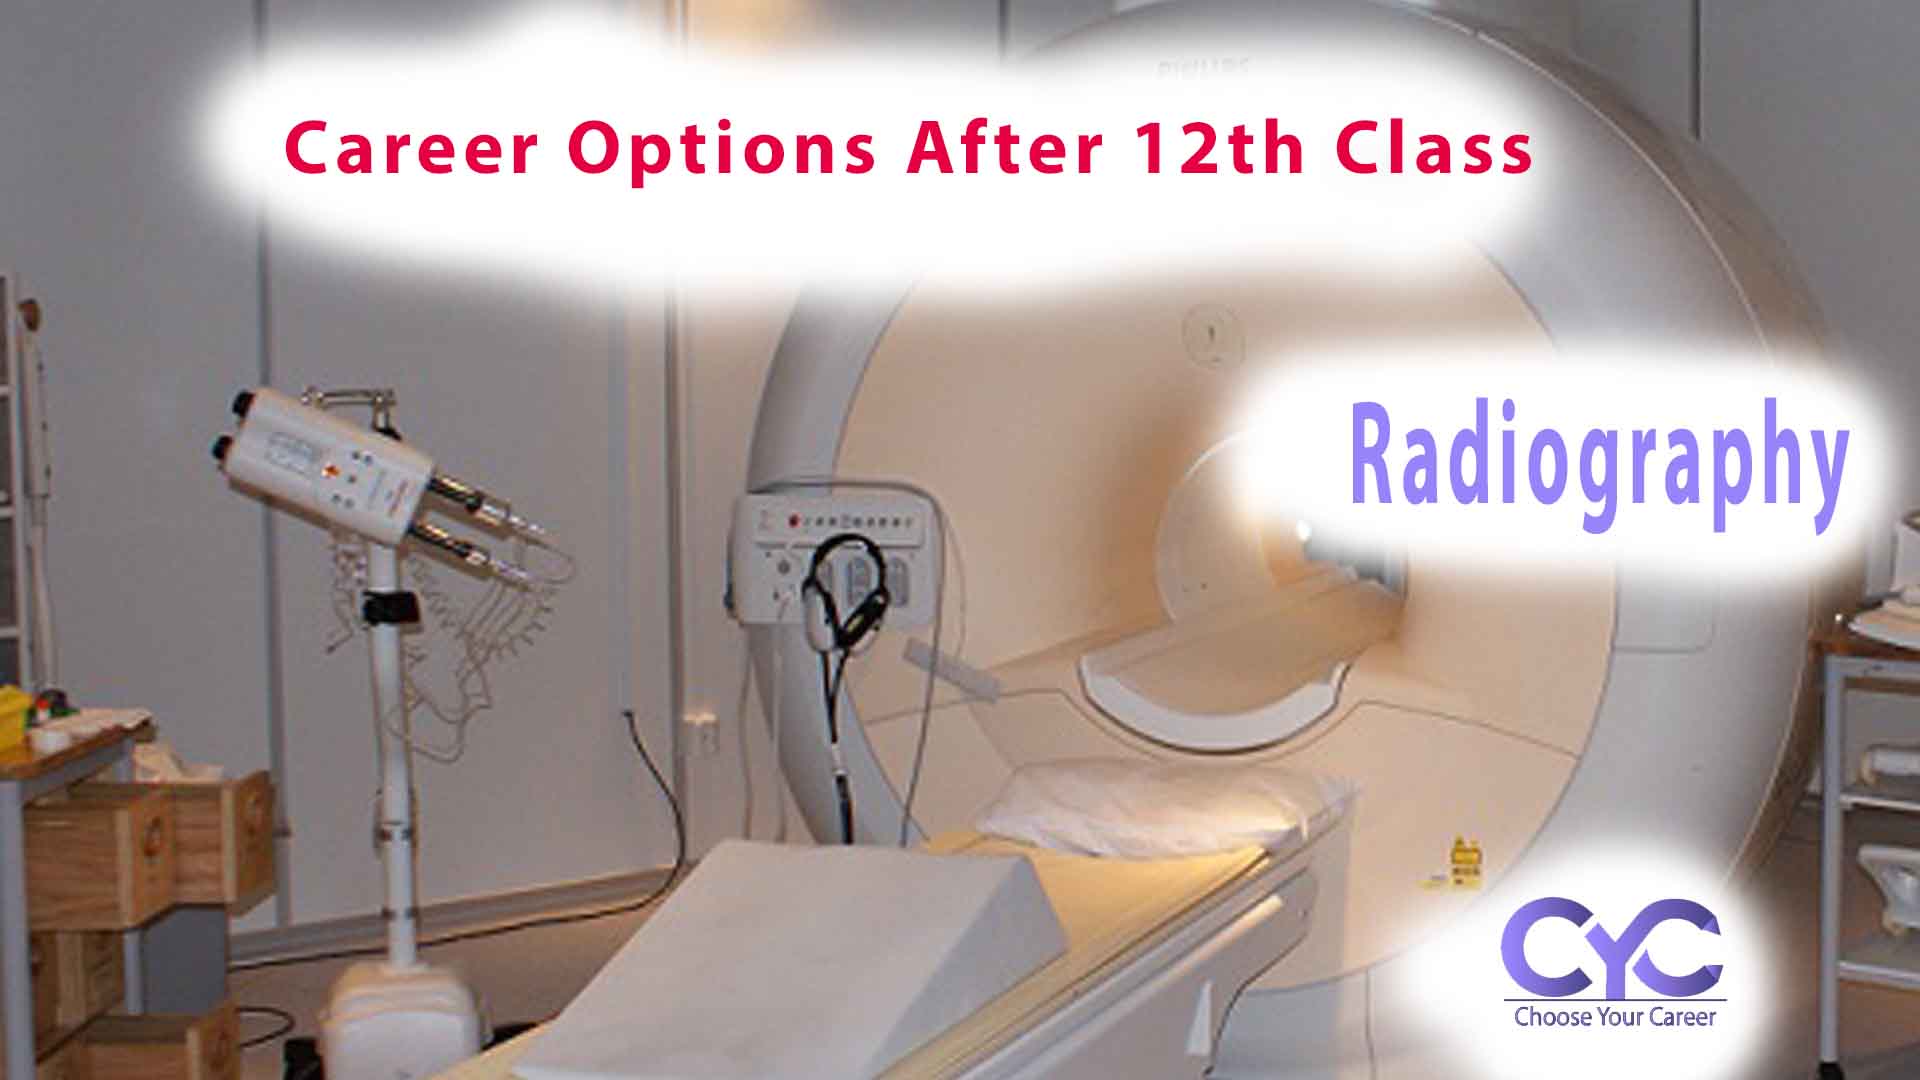 Bachelor of Science (B.Sc.) in Radiography Courses Fee, Eligibility and Salary